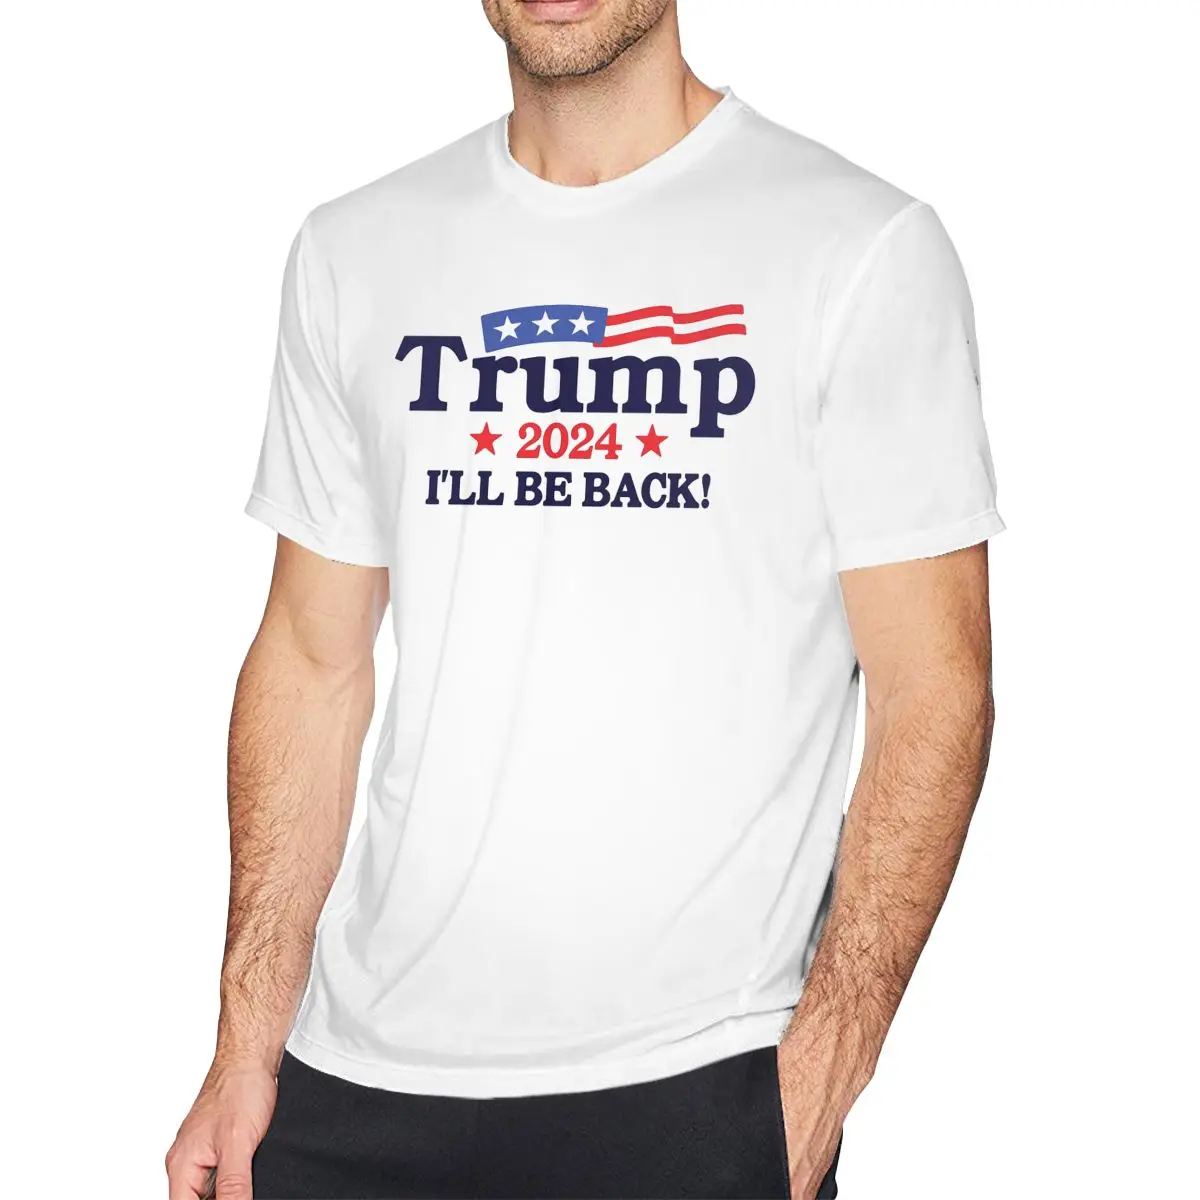 

Men Words T Shirts Cotton Clothes Vintage Short Sleeve Crew Neck Biden Trump President of The United States Tees T-Shirts